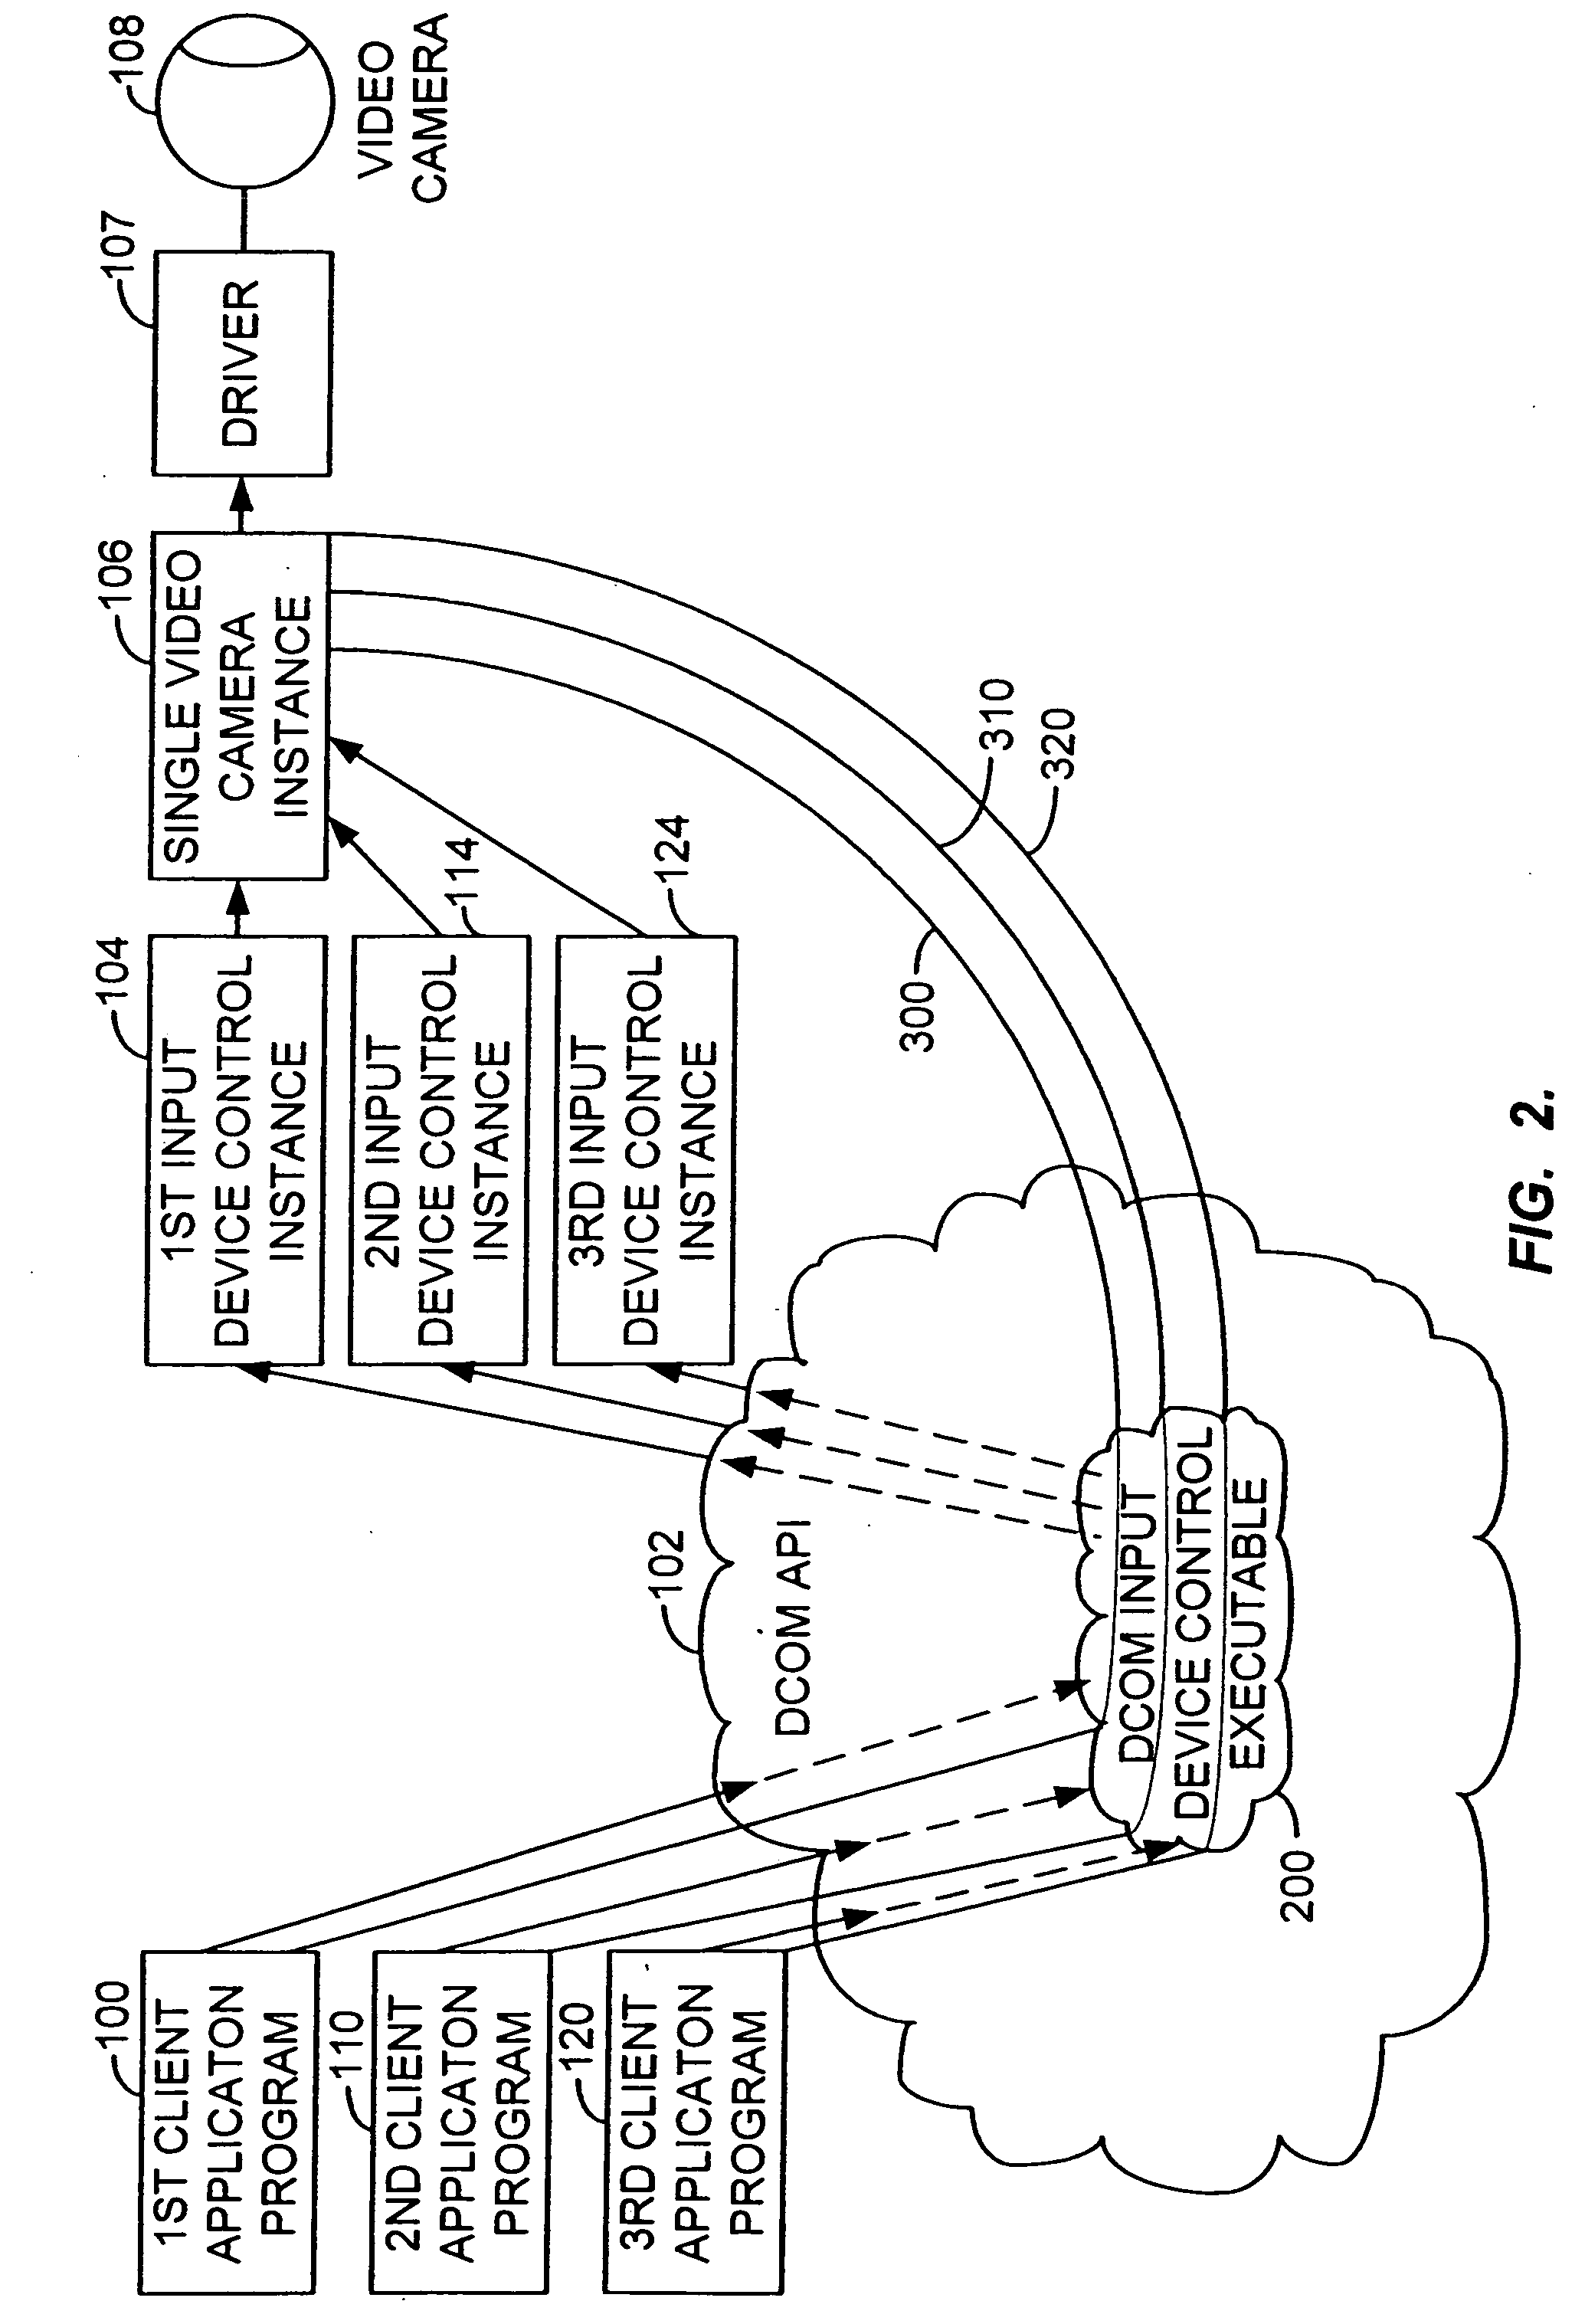 Method and system for providing multi-media data from various sources to various client applications